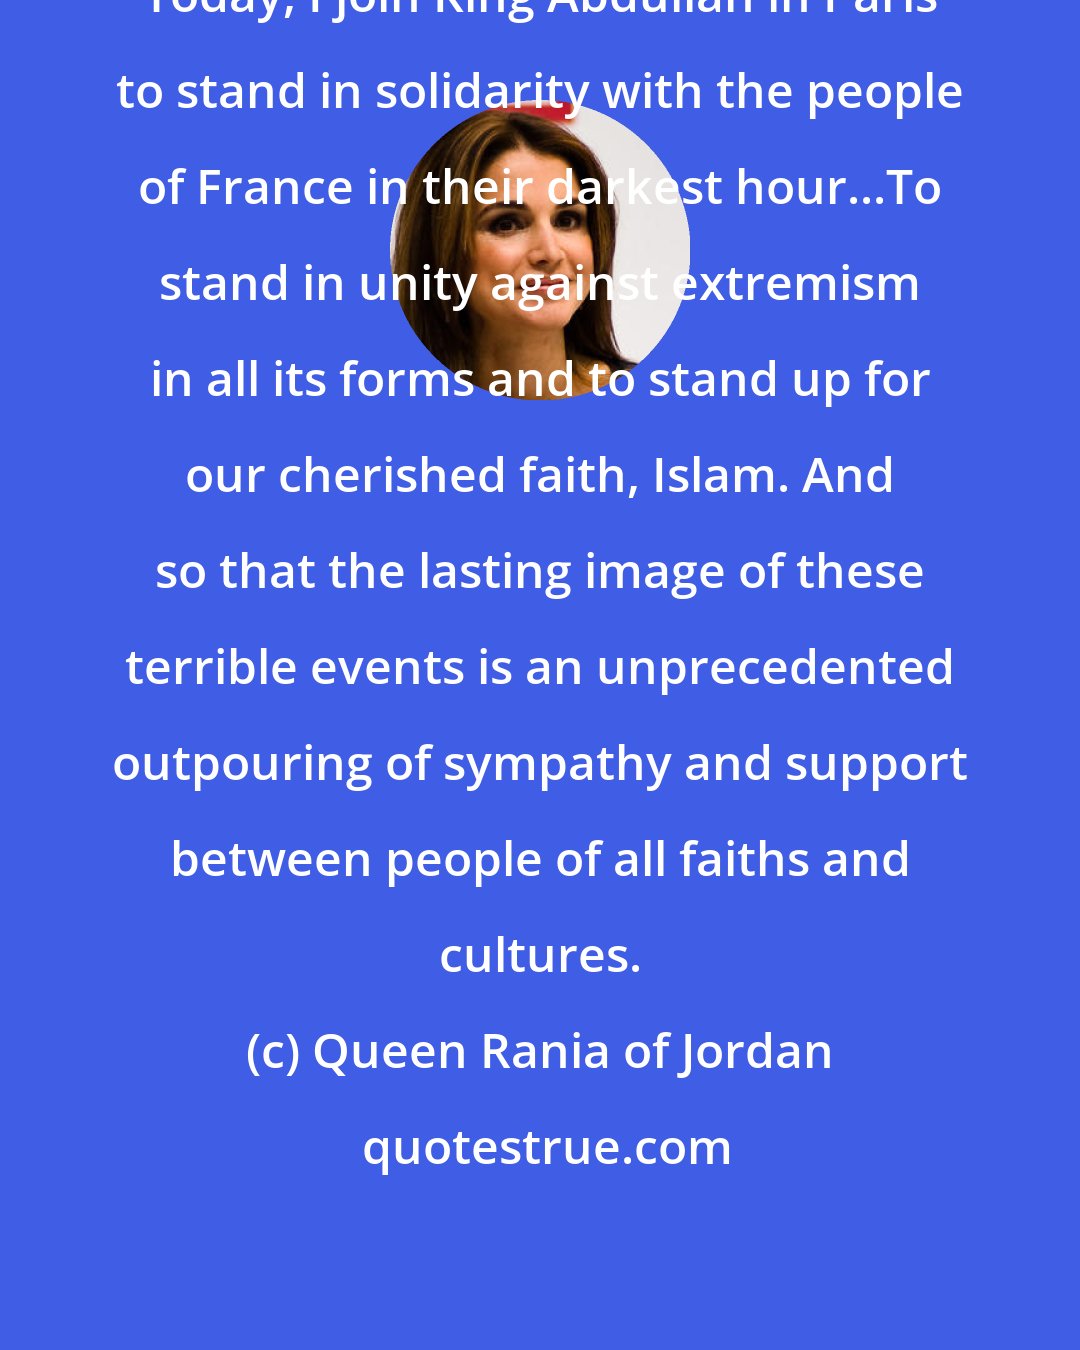 Queen Rania of Jordan: Today, I join King Abdullah in Paris to stand in solidarity with the people of France in their darkest hour...To stand in unity against extremism in all its forms and to stand up for our cherished faith, Islam. And so that the lasting image of these terrible events is an unprecedented outpouring of sympathy and support between people of all faiths and cultures.